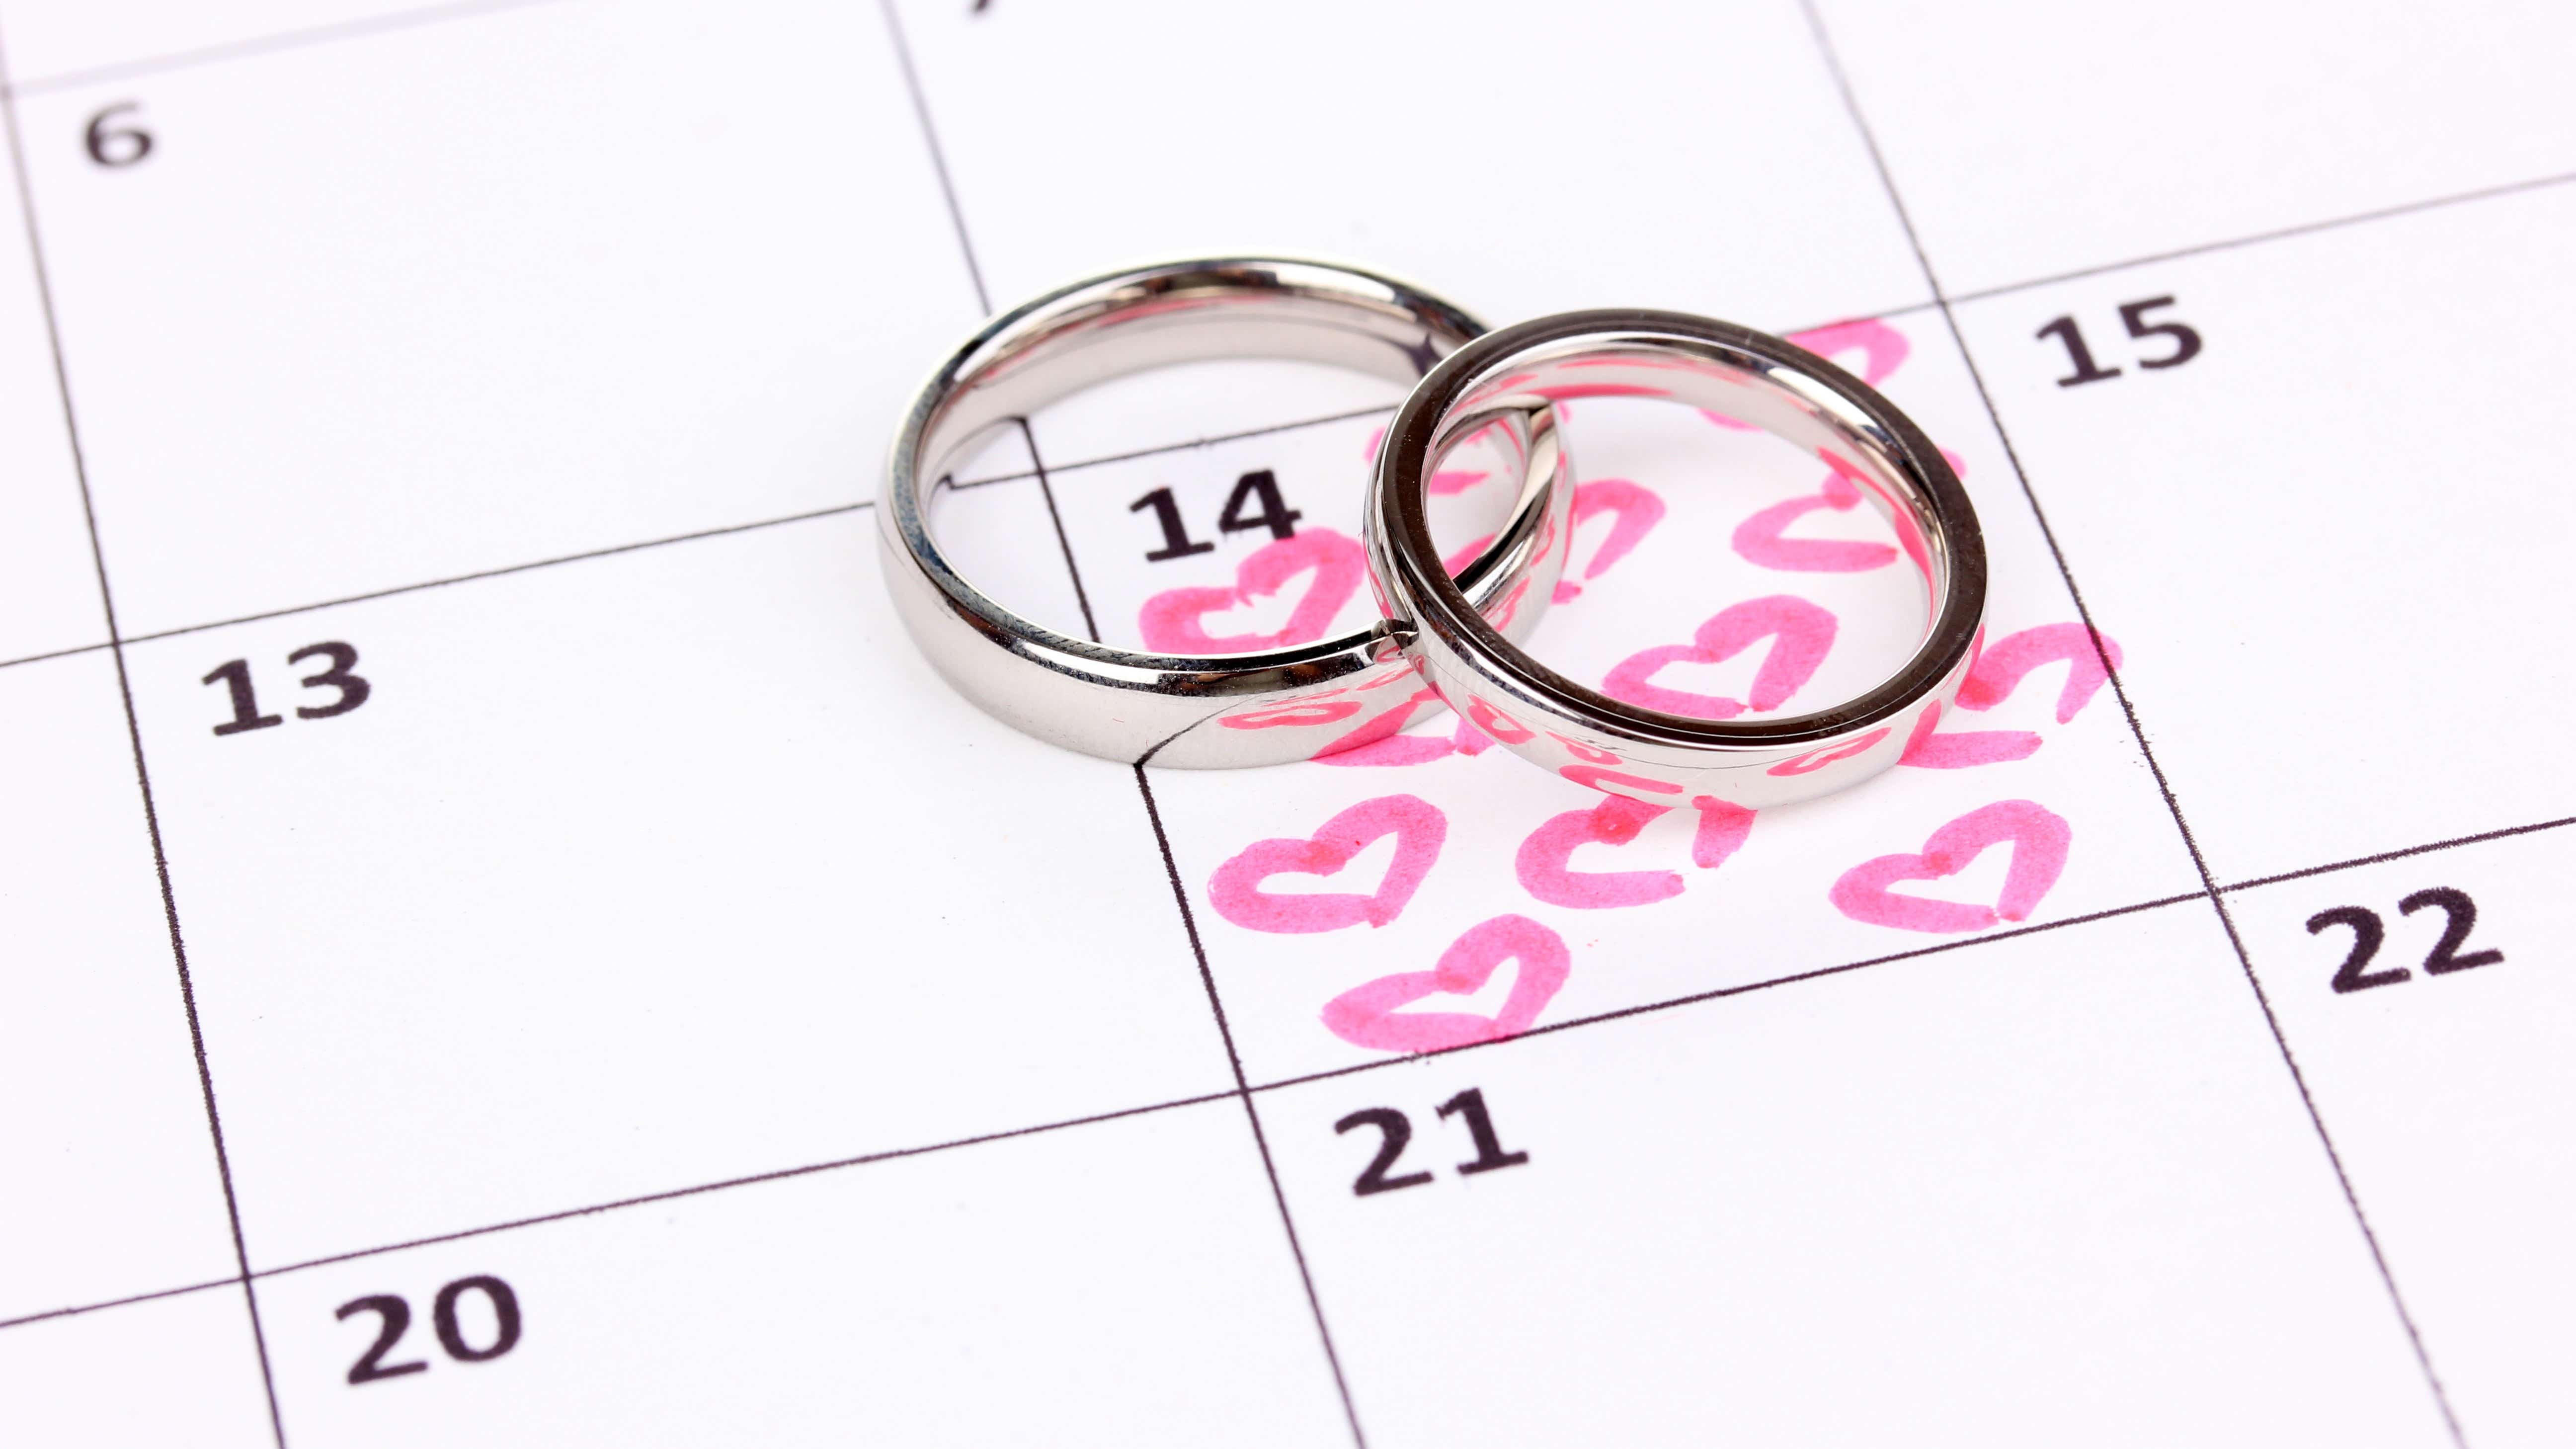 Wedding rings on a calendar marked with the wedding date